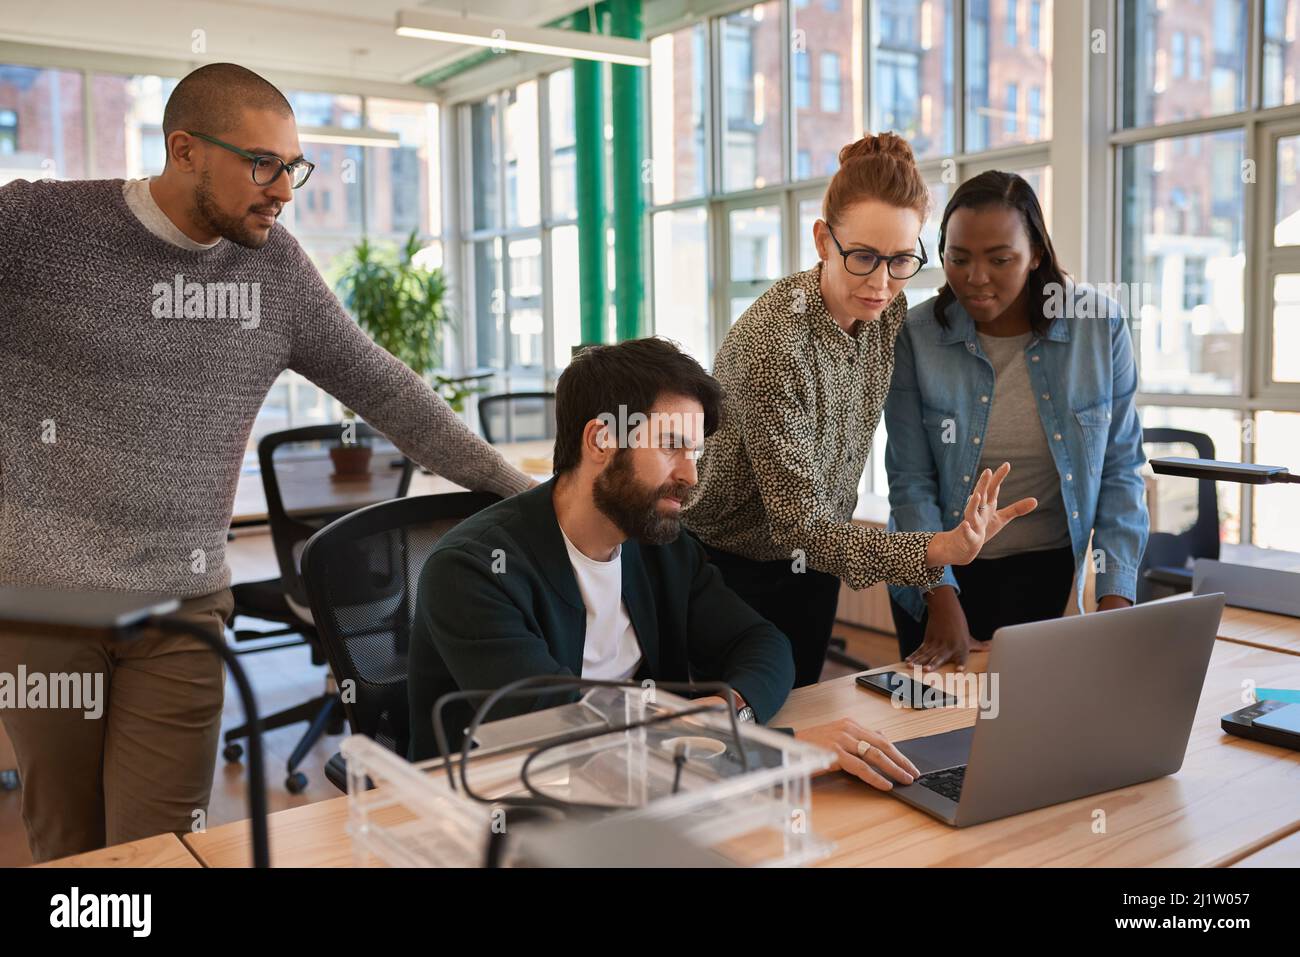 Focused group of diverse businesspeople working together on a laptop Stock Photo